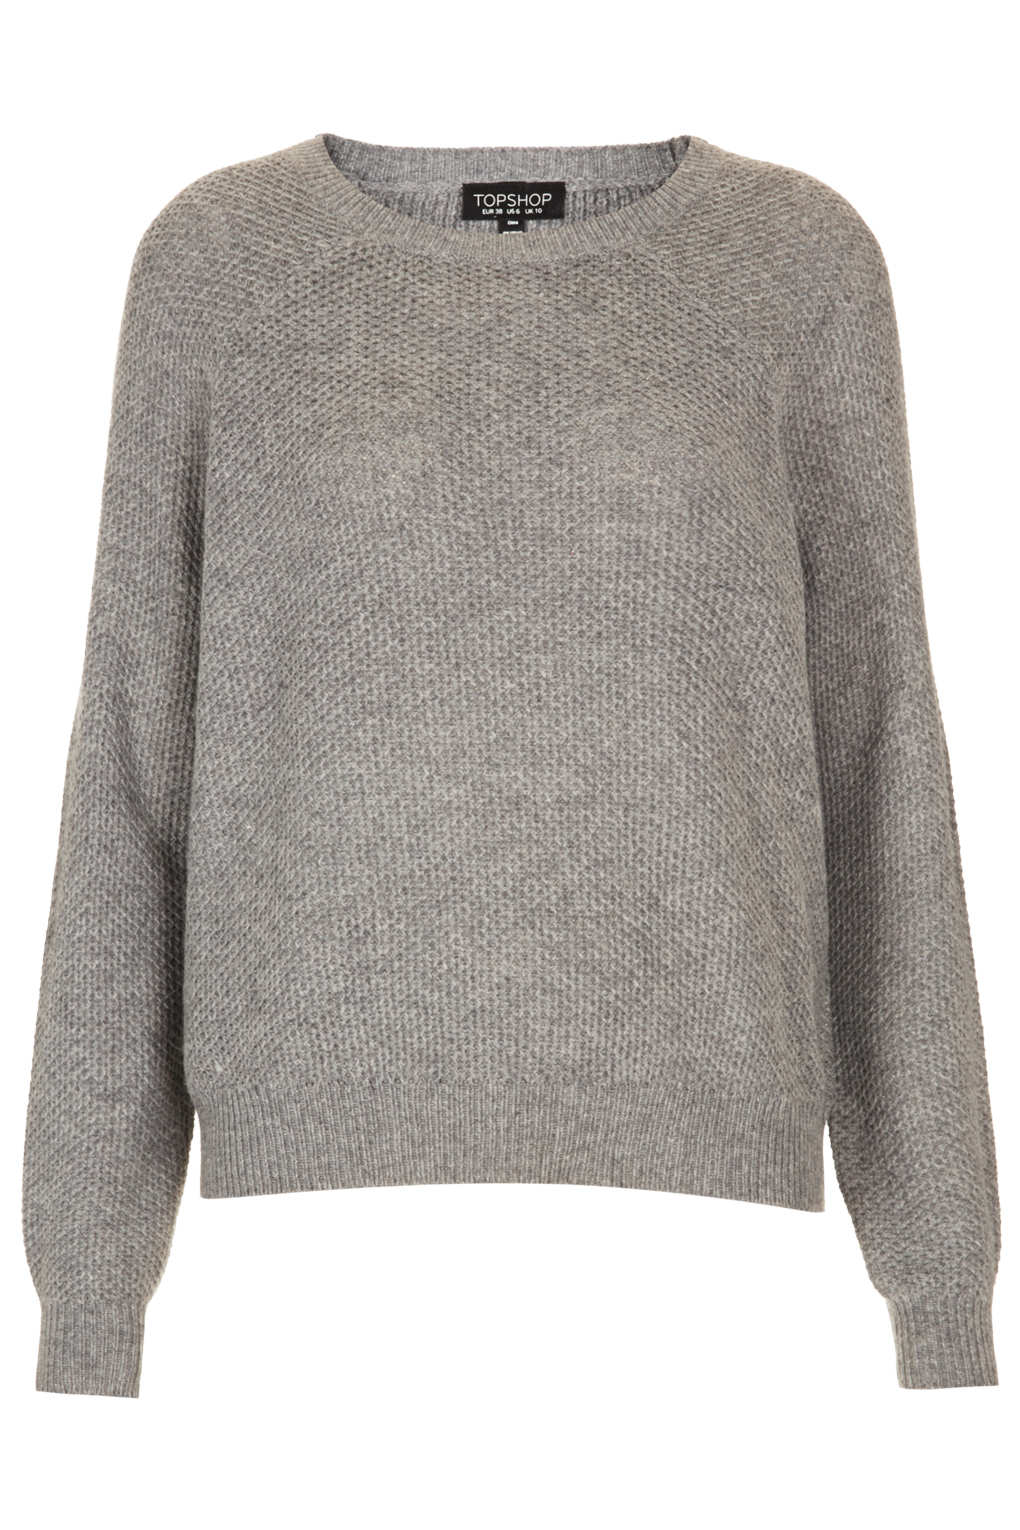 Lyst Topshop Knitted Elbow Patch Jumper In Gray